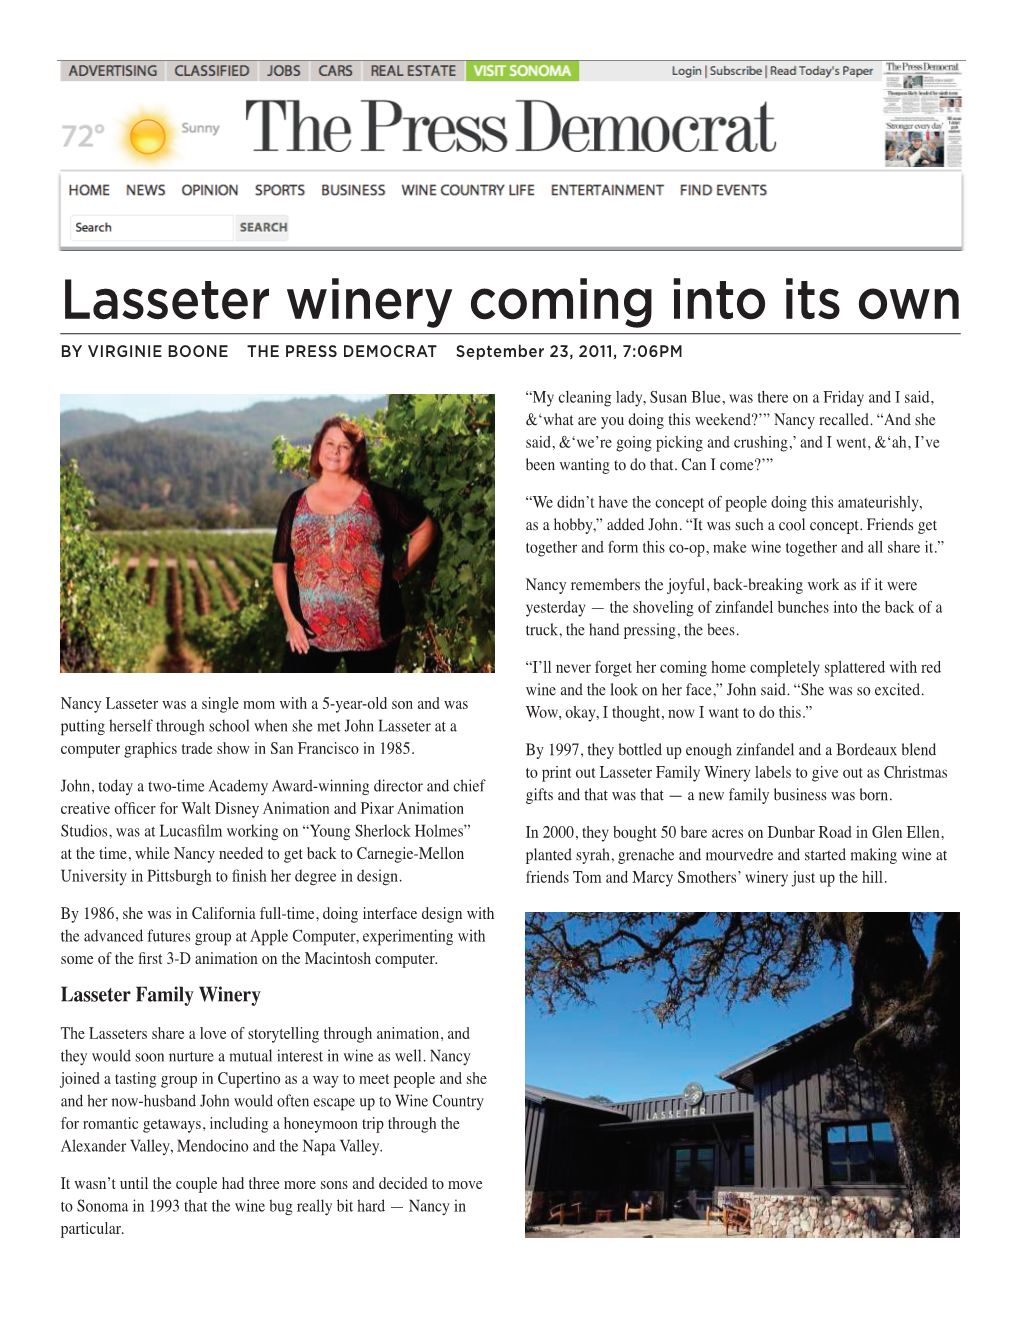 Lasseter Winery Coming Into Its Own by VIRGINIE BOONE the PRESS DEMOCRAT September 23, 2011, 7:06PM